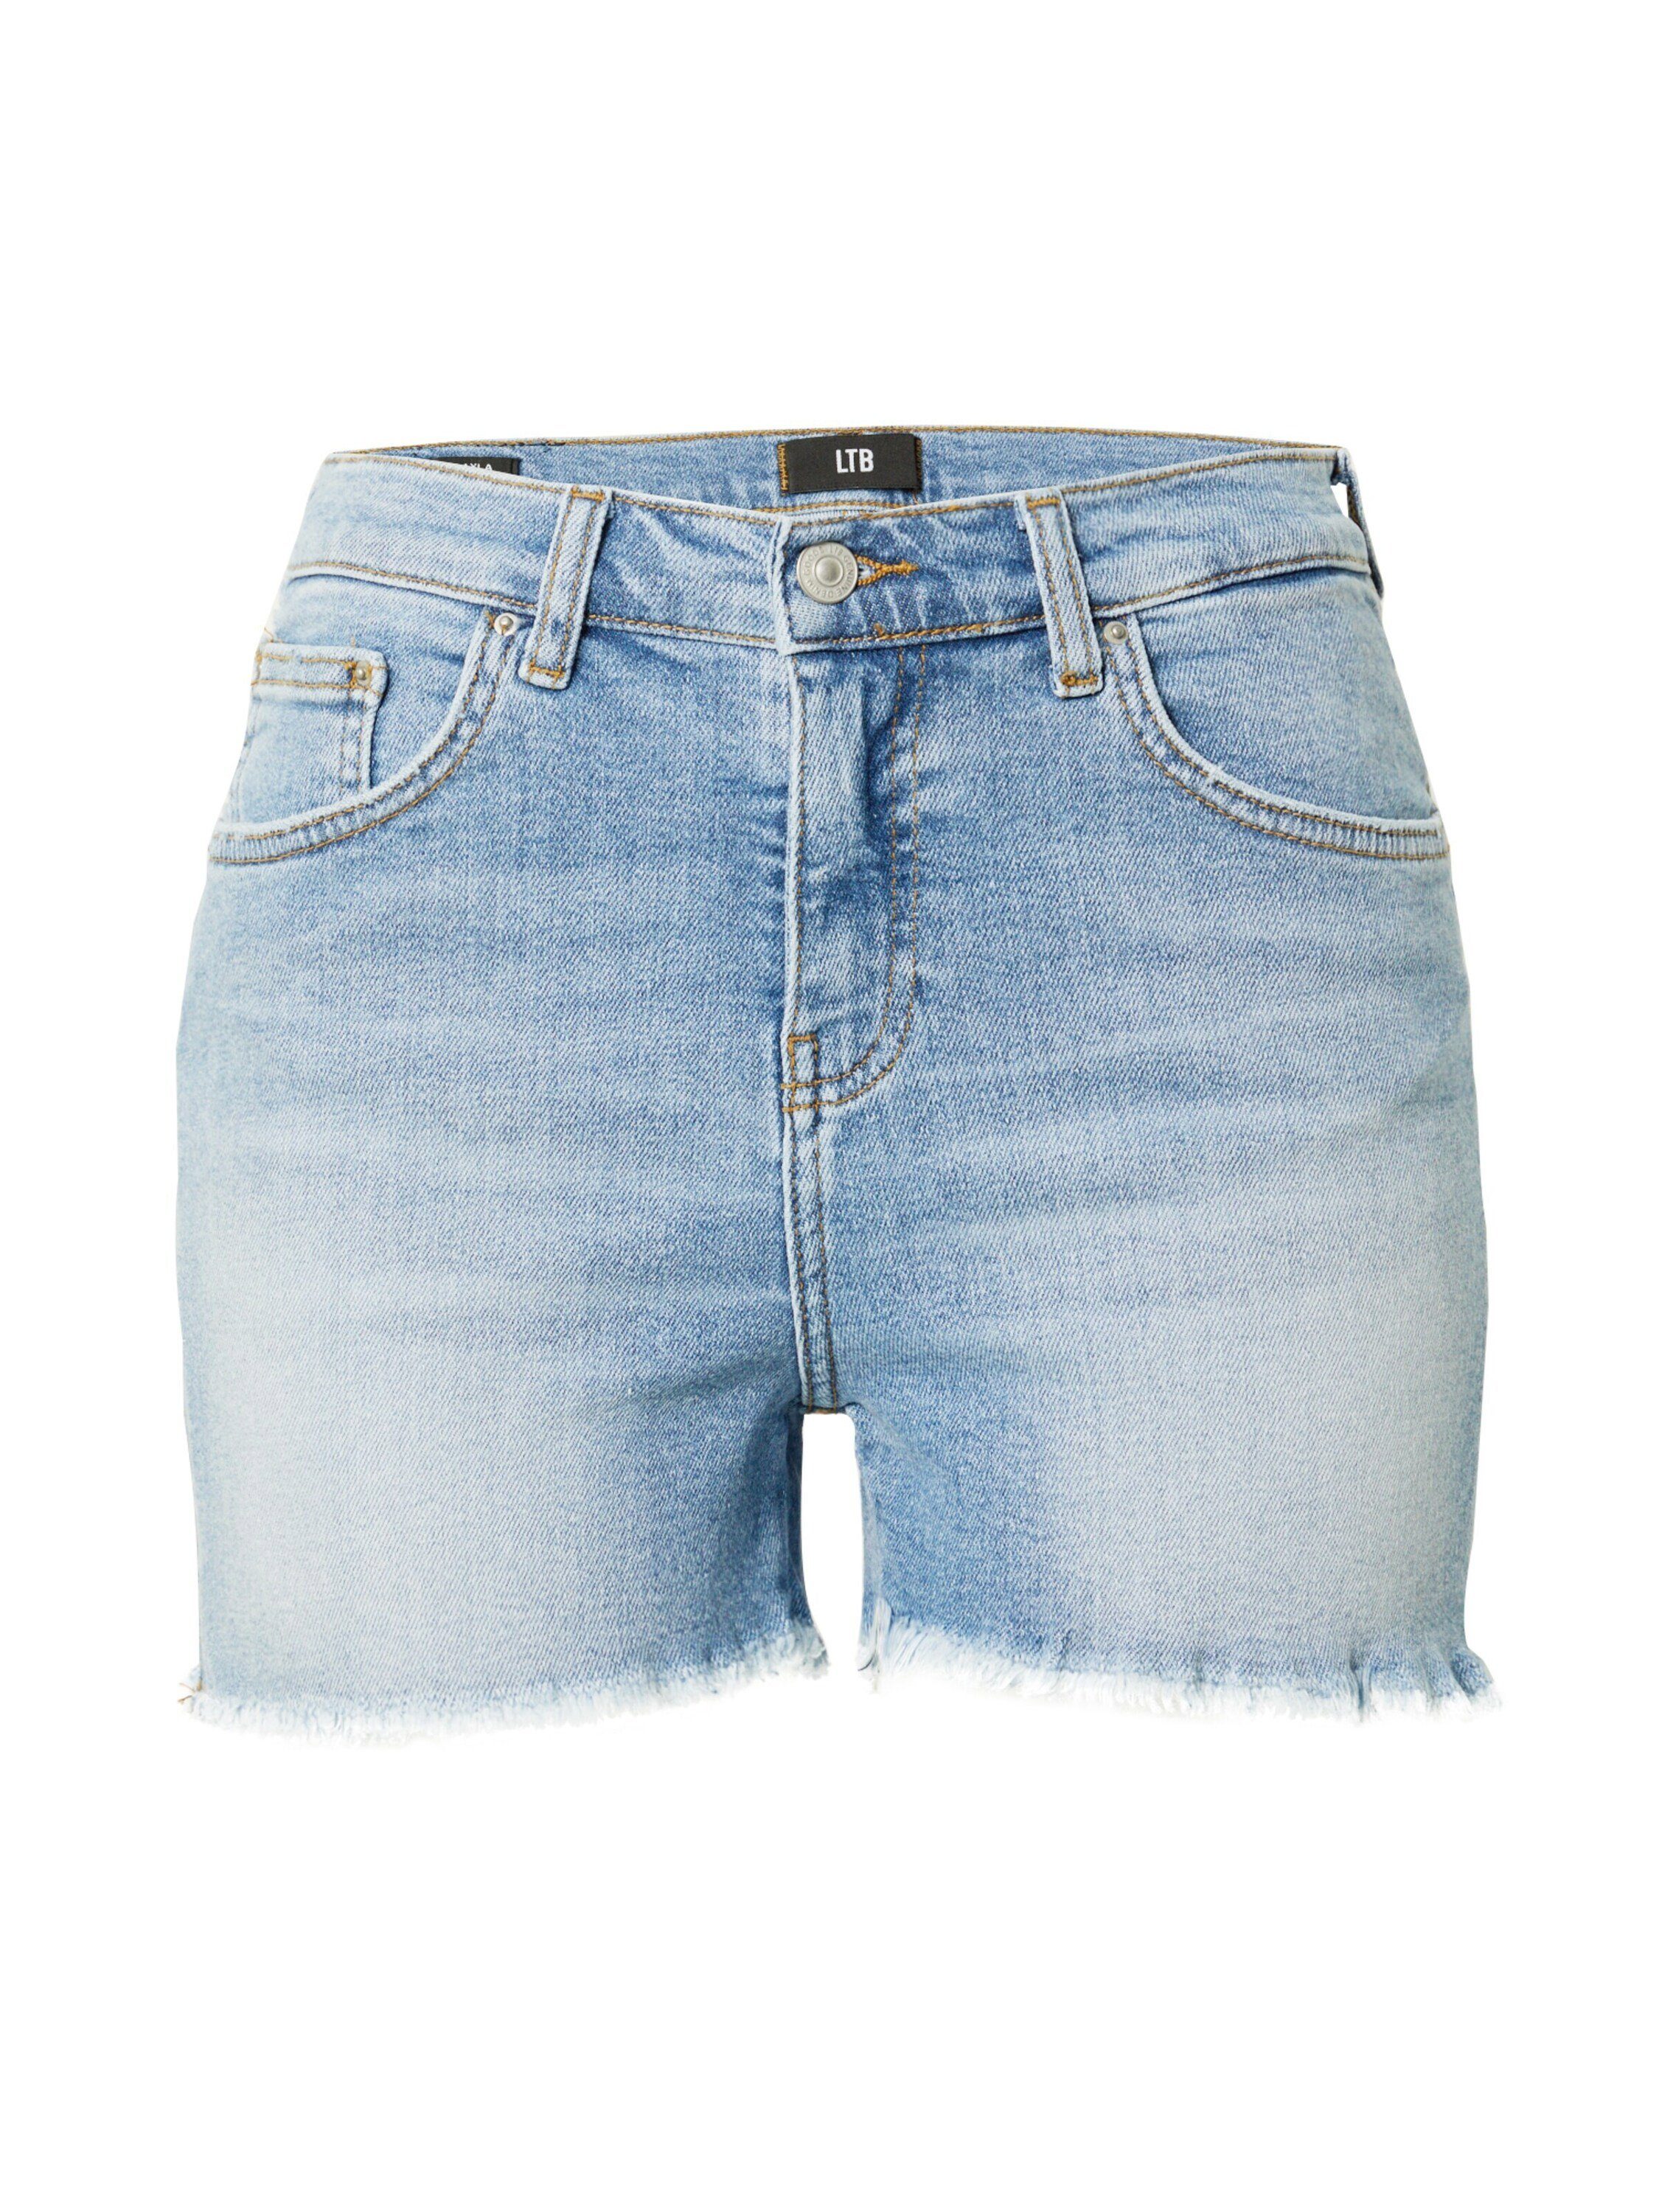 LAYLA LTB (1-tlg) Weiteres Detail Jeansshorts Patches,